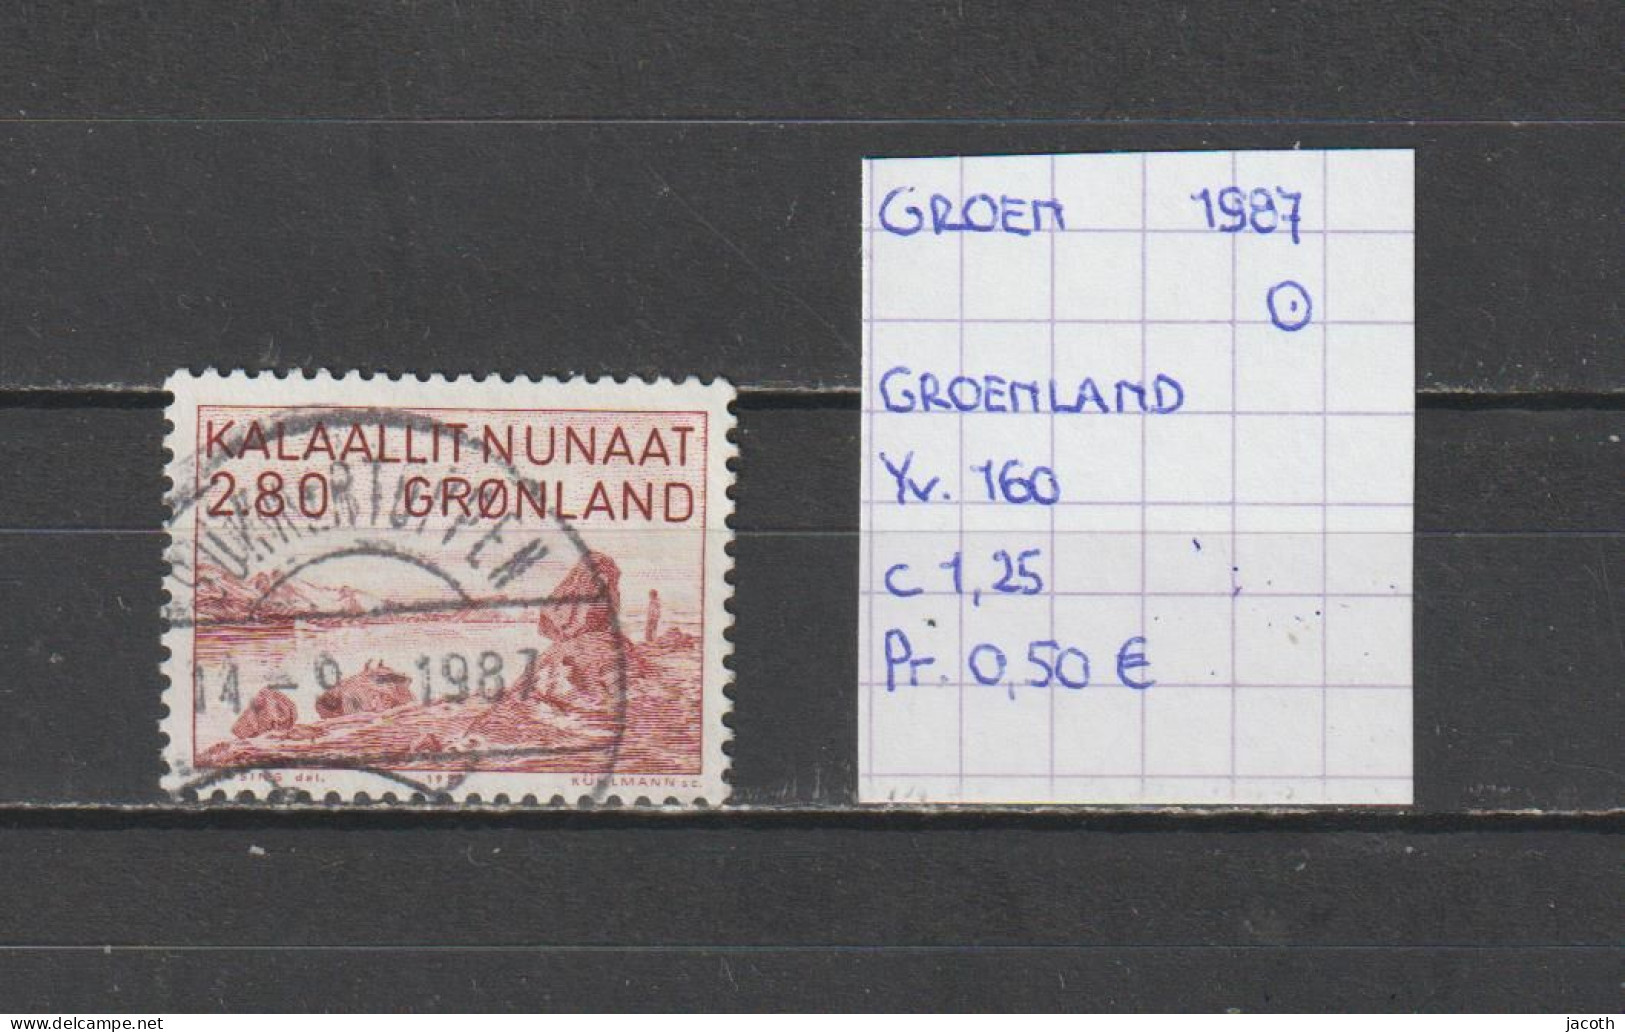 (TJ) Groenland 1987 - YT 160 (gest./obl./used) - Used Stamps